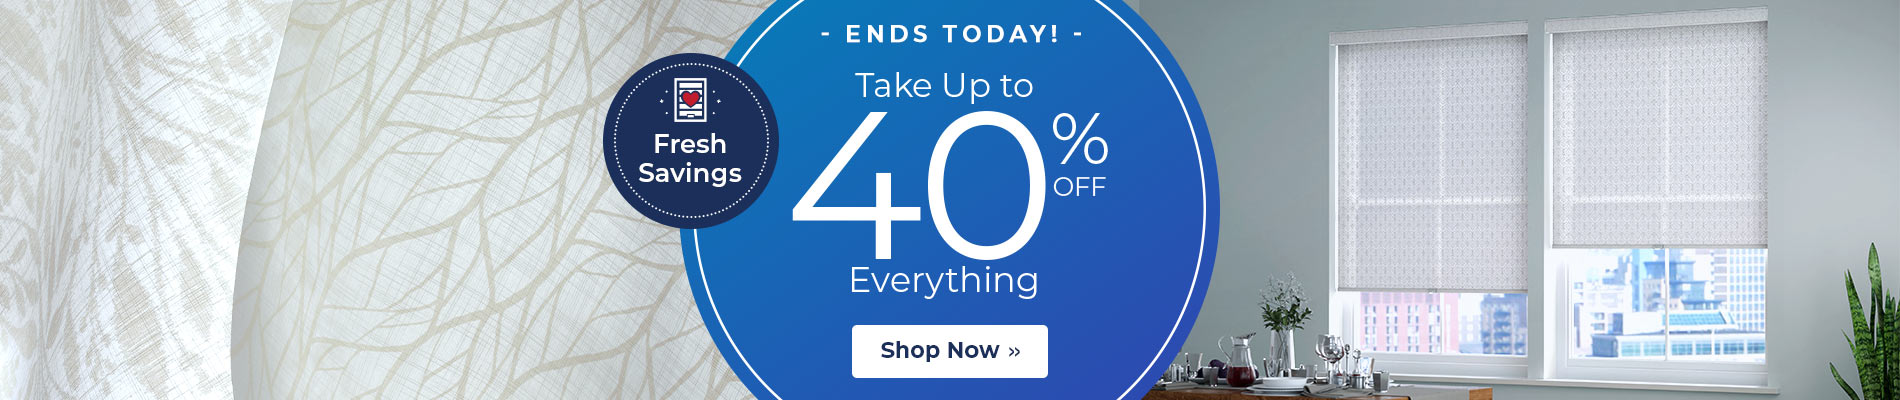 Take Up To 40% Off Everything!